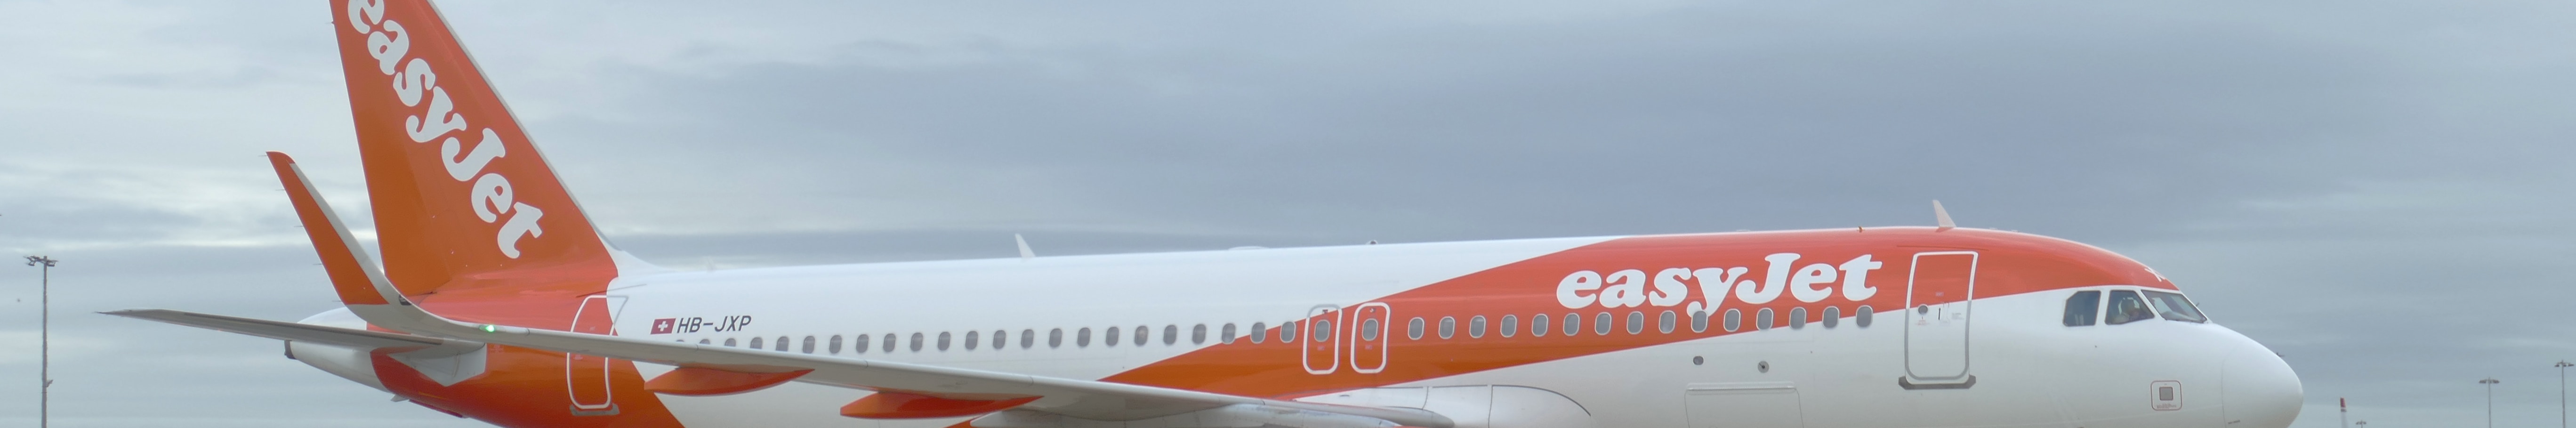 Easyjet emitted an estimated~13,054t of air pollutants during Landing Take-Off (LTO) operations